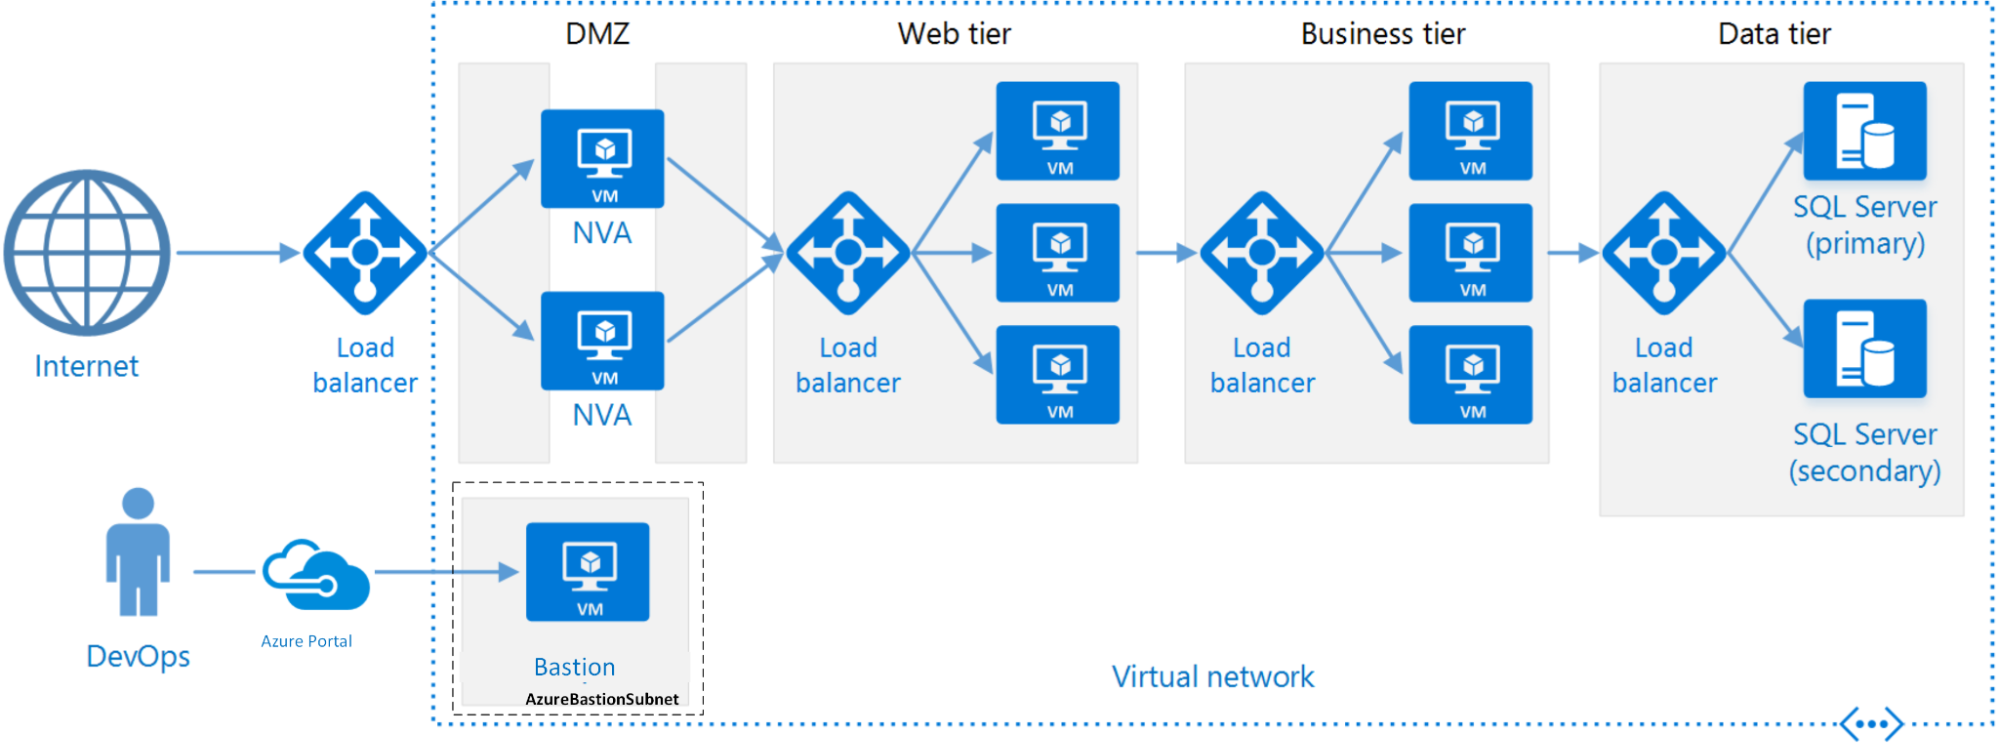 A standard N-tier architecture on Azure